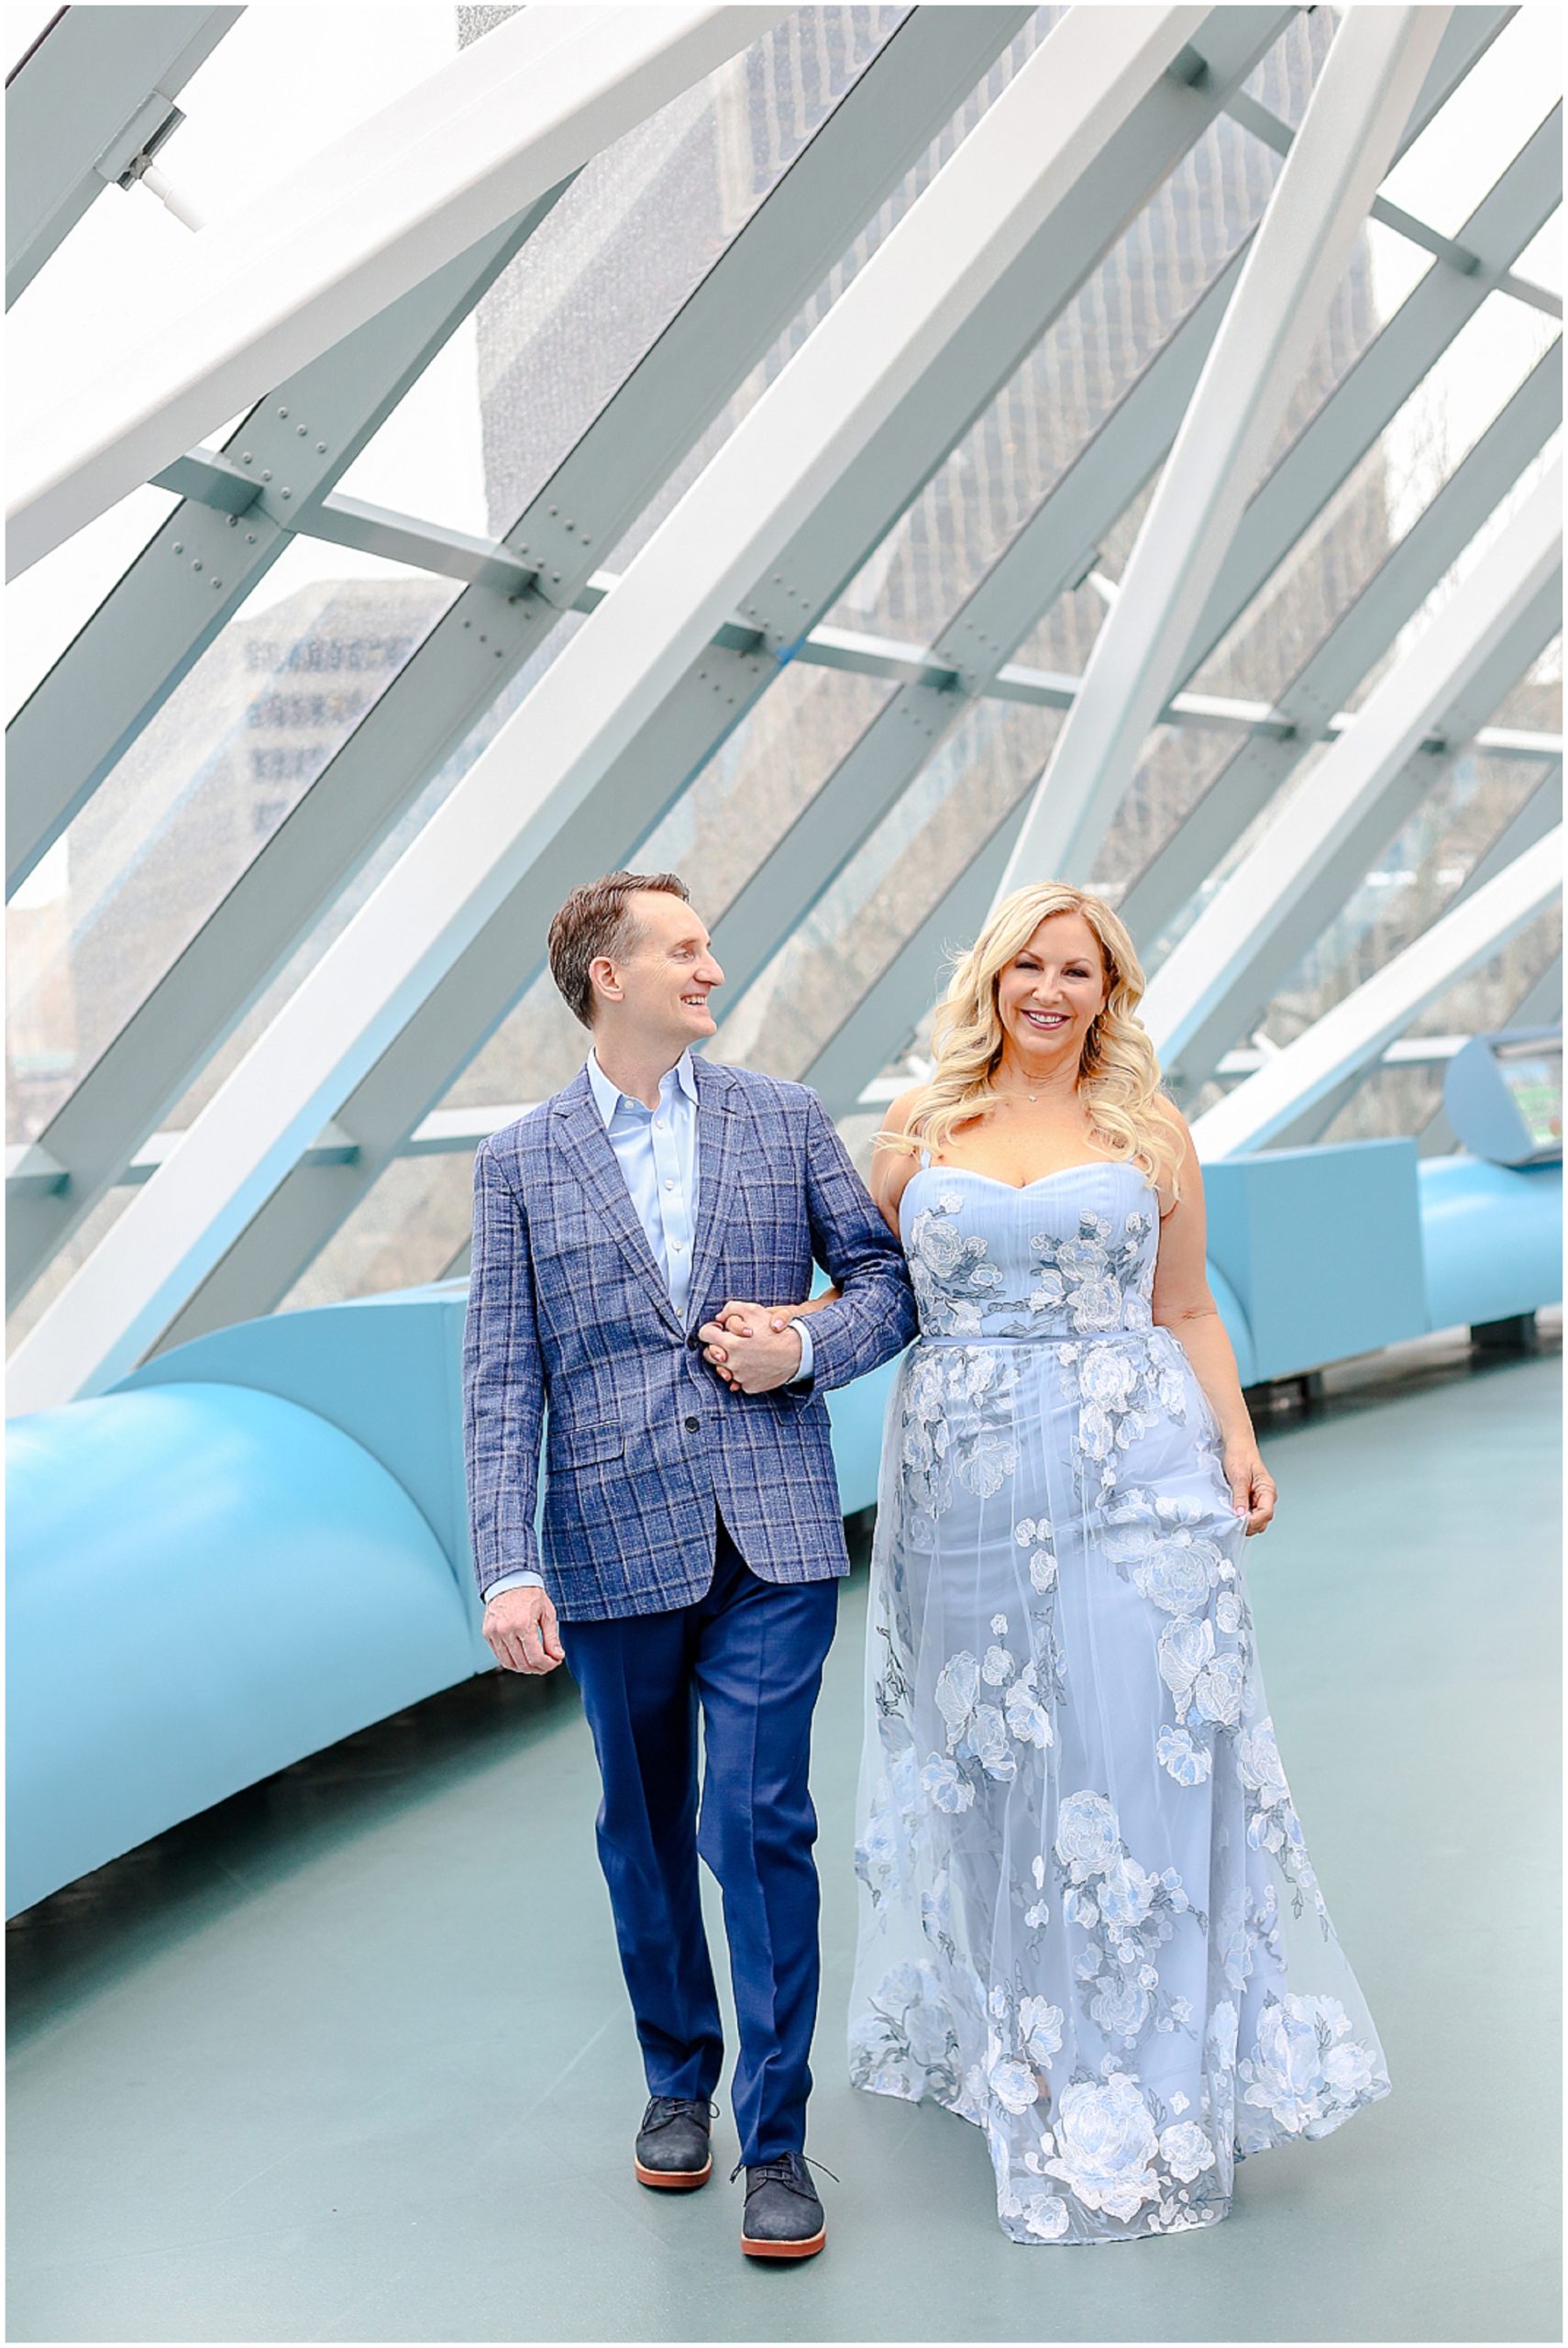 happy engaged couple for their engagement portraits in kansas city - liberty memorial - crown center